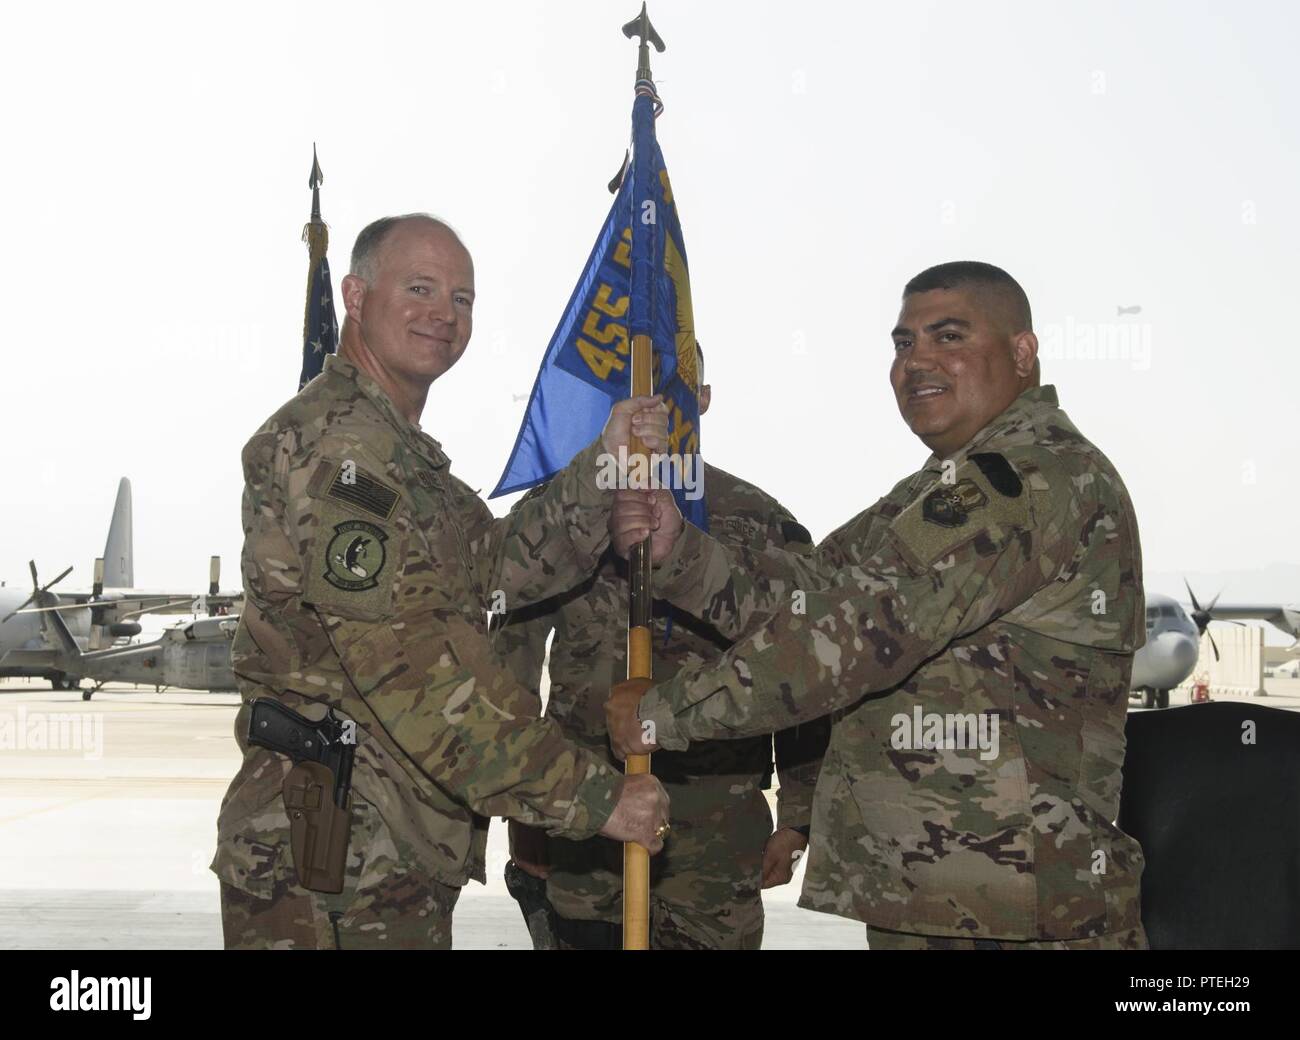 Lt. Col. Robert Kongaika, right, the incoming 455th Expeditionary Aircraft Maintenance Squadron commander, receives the 455th EAMXS guidon from Col. Tim Trimmell, the 455th Expeditionary Maintenance Group commander, during a change of command at Bagram Airfield, July 14, 2017. Kongaika previously served as the 31st Aircraft Maintenance Squadron commander at Aviano Air Base, Italy. Stock Photo